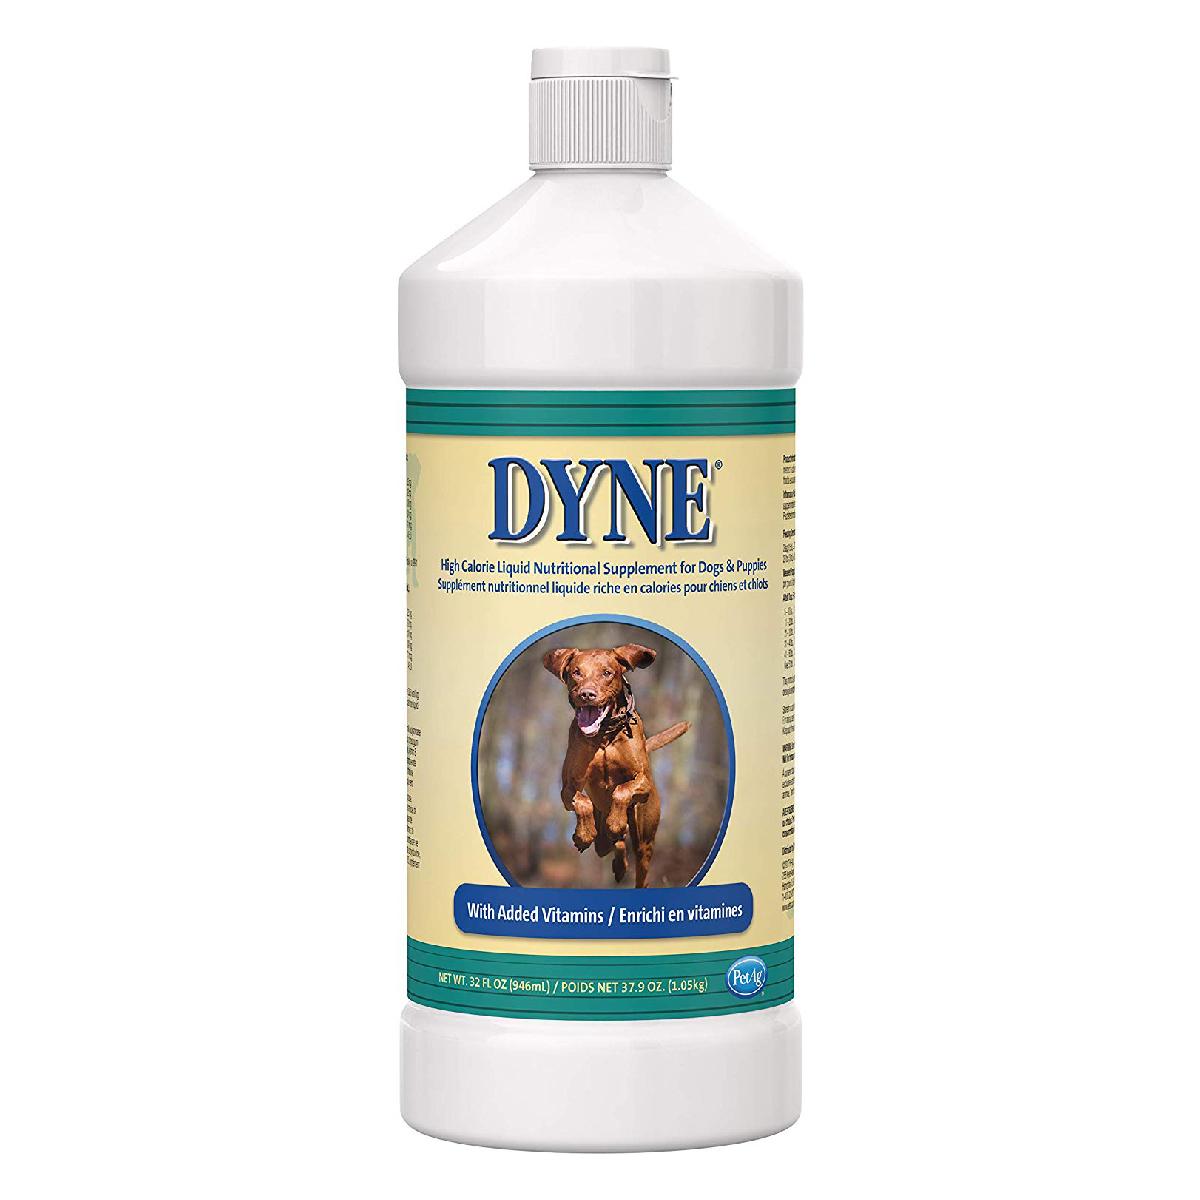 Dyne High Calorie Liquid Nutritional Supplement for Dogs & Puppies, 32